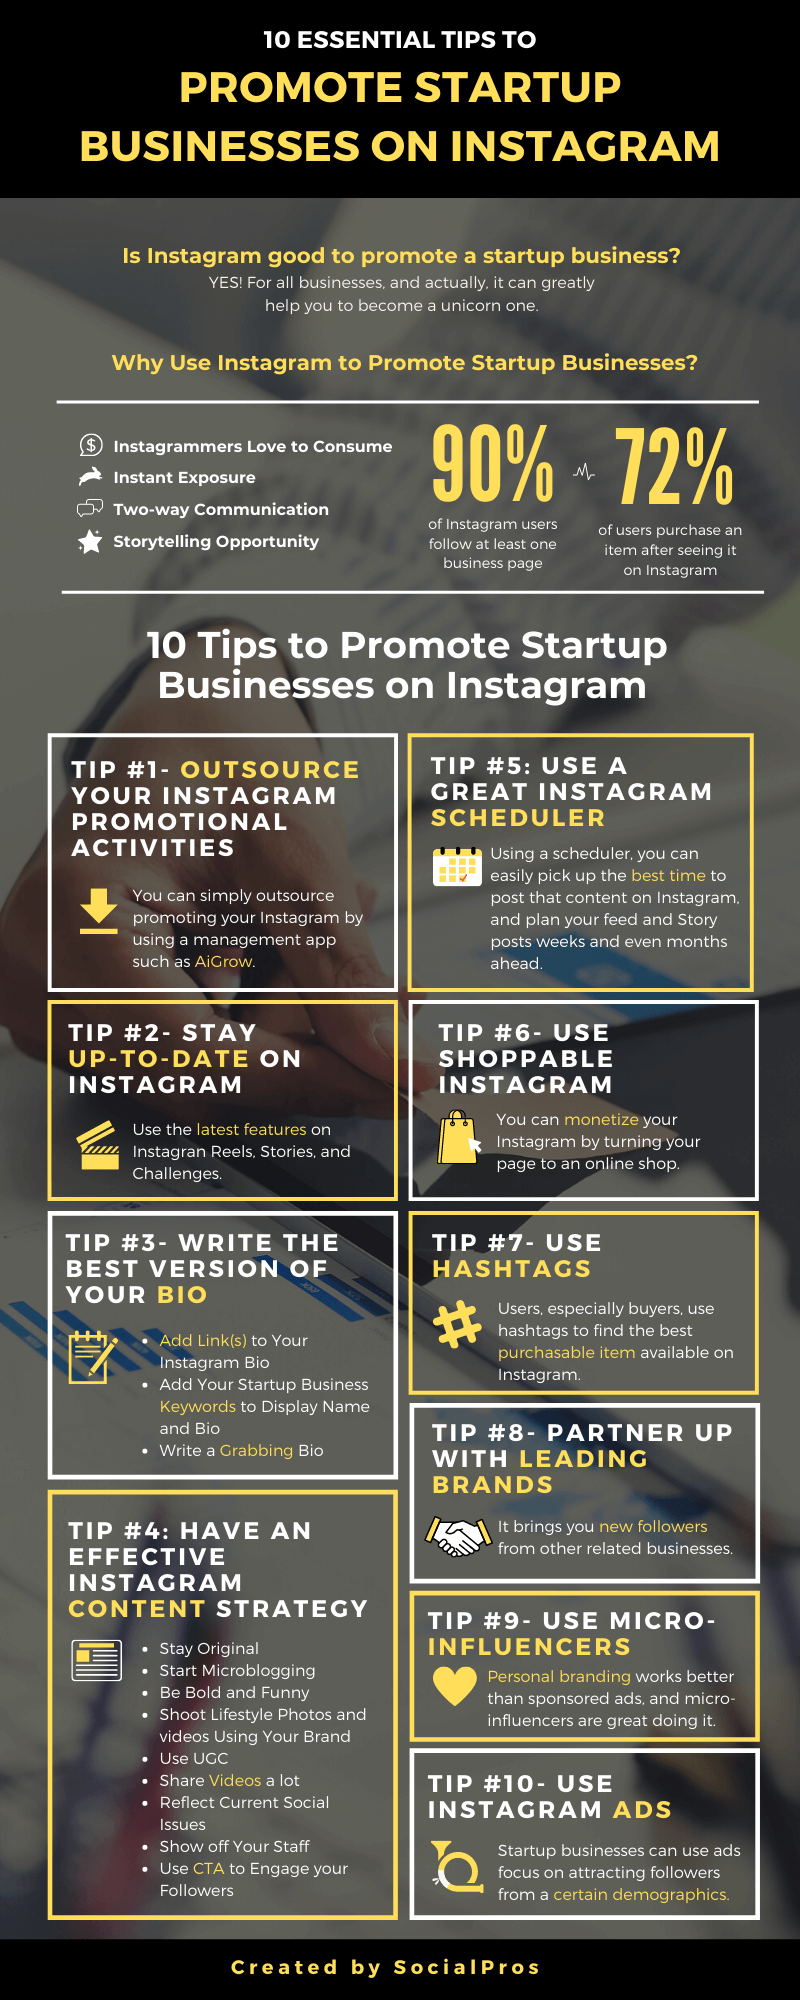 Infographic for Promoting Startup Business on Instagram with 10 tips